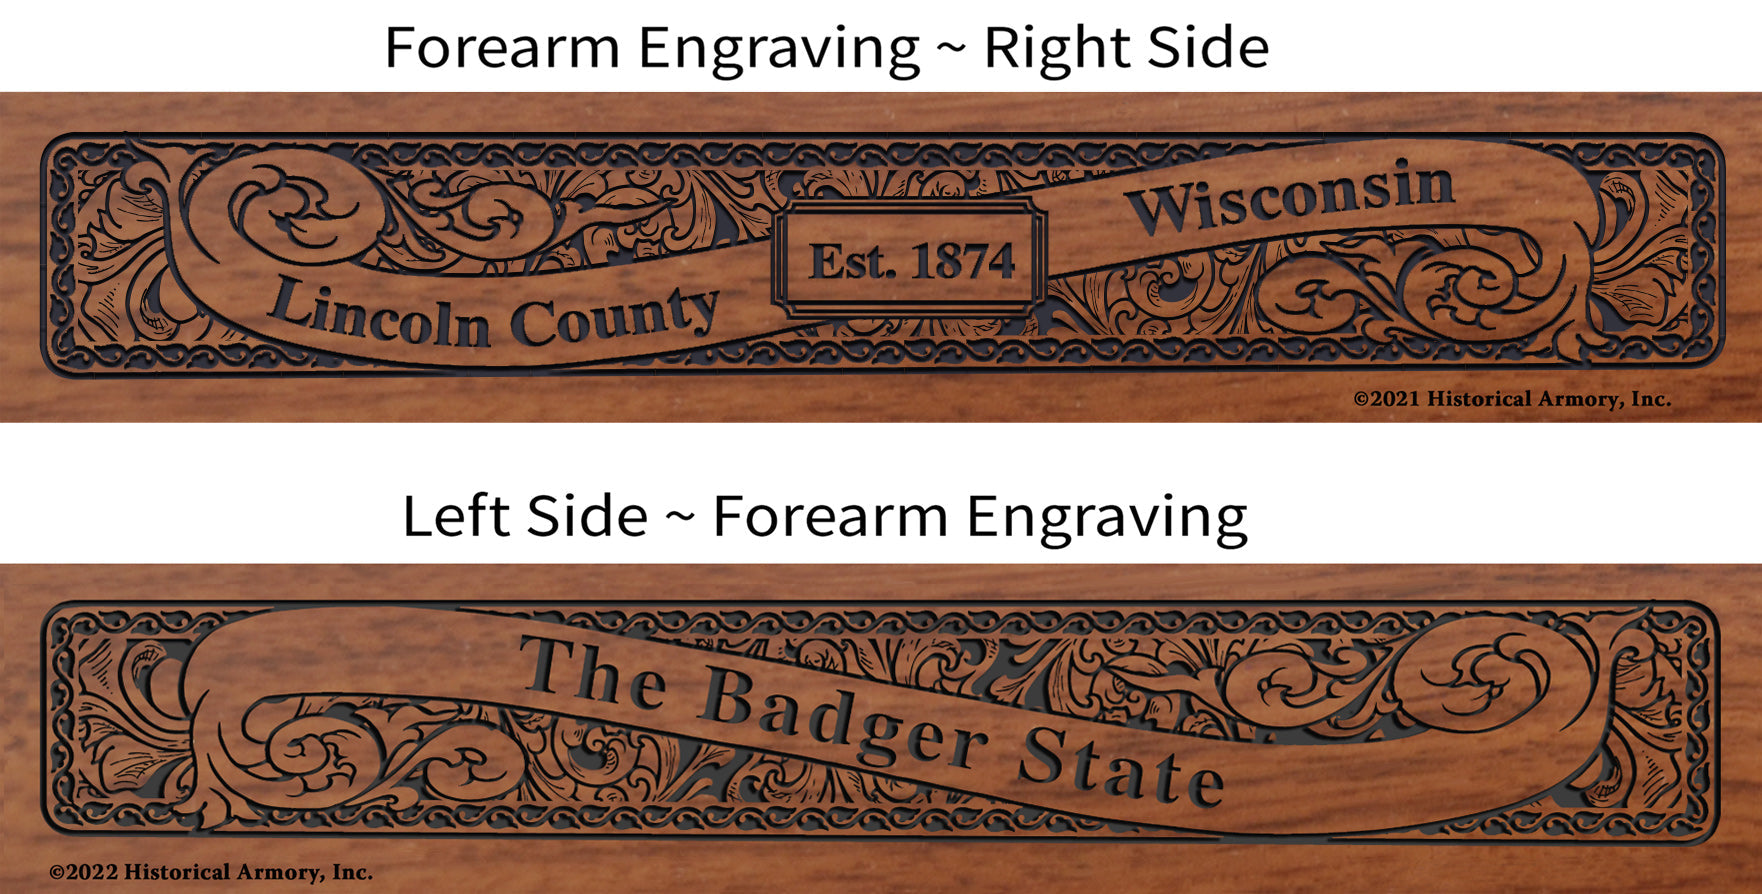 Lincoln County Wisconsin Engraved Rifle Forearm